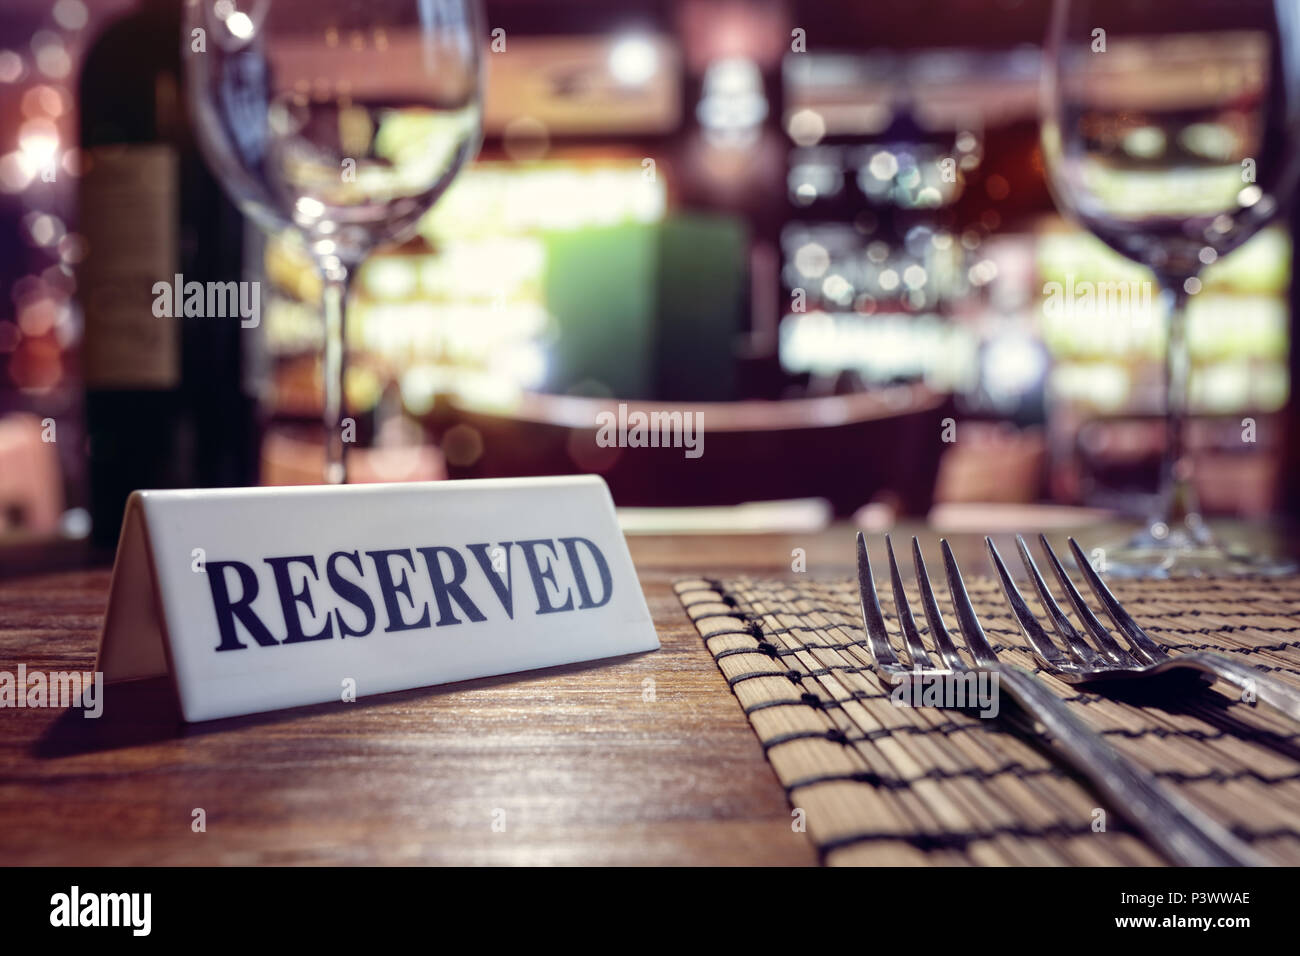 Restaurant reserved table sign with places setting and wine glasses ready for a party Stock Photo